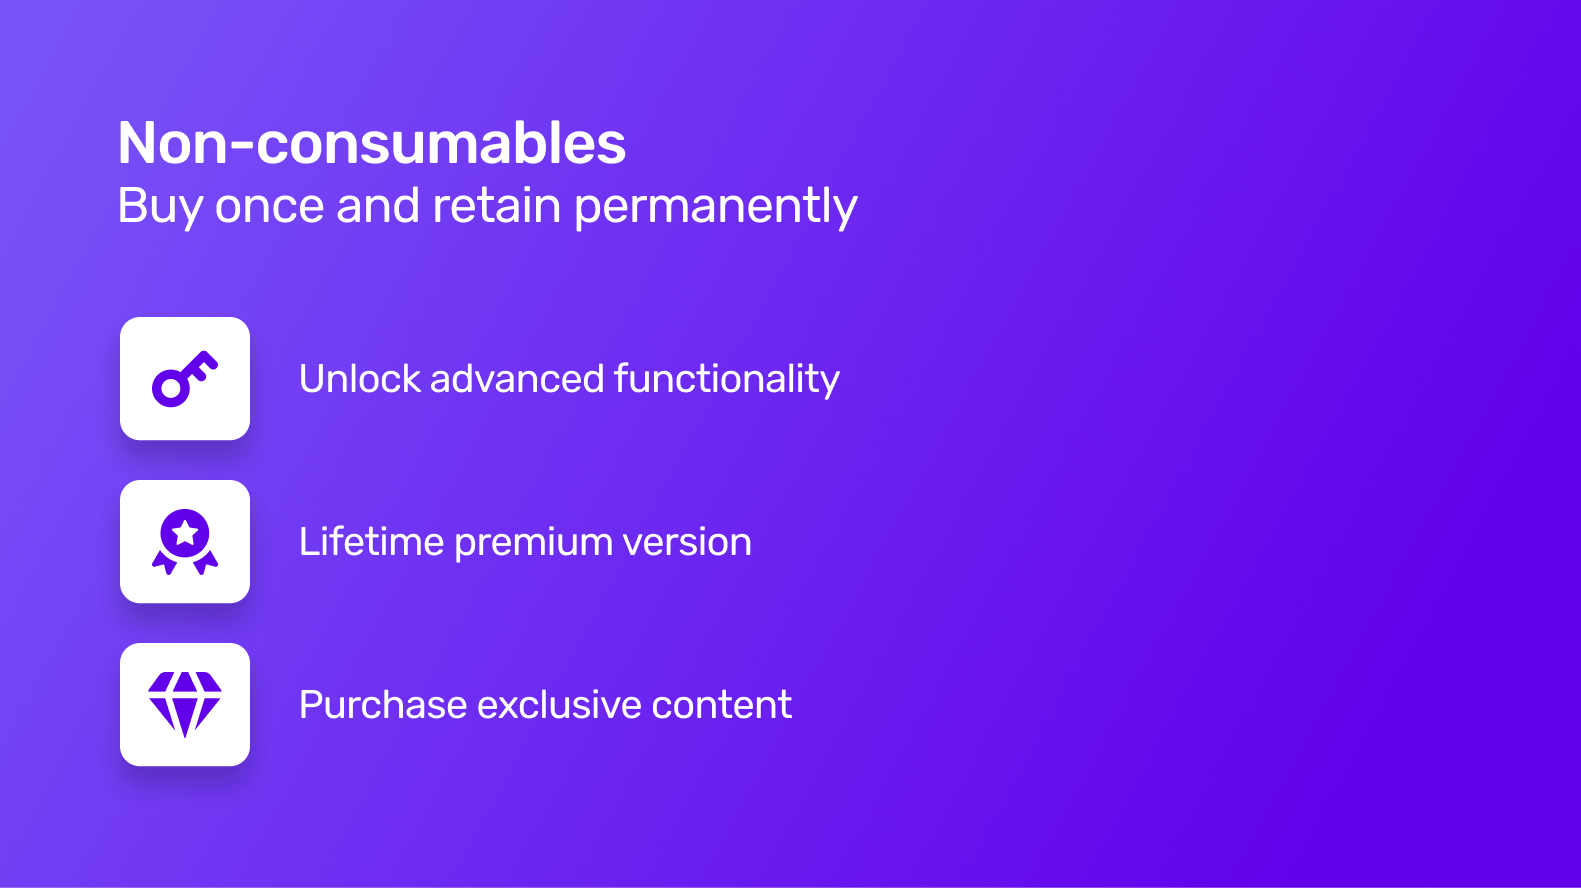 Non-consumables (buy once and retain permanently) as a type of in-app purchase, listing unlock advanced functionality, lifetime premium version and purchase exclusive content